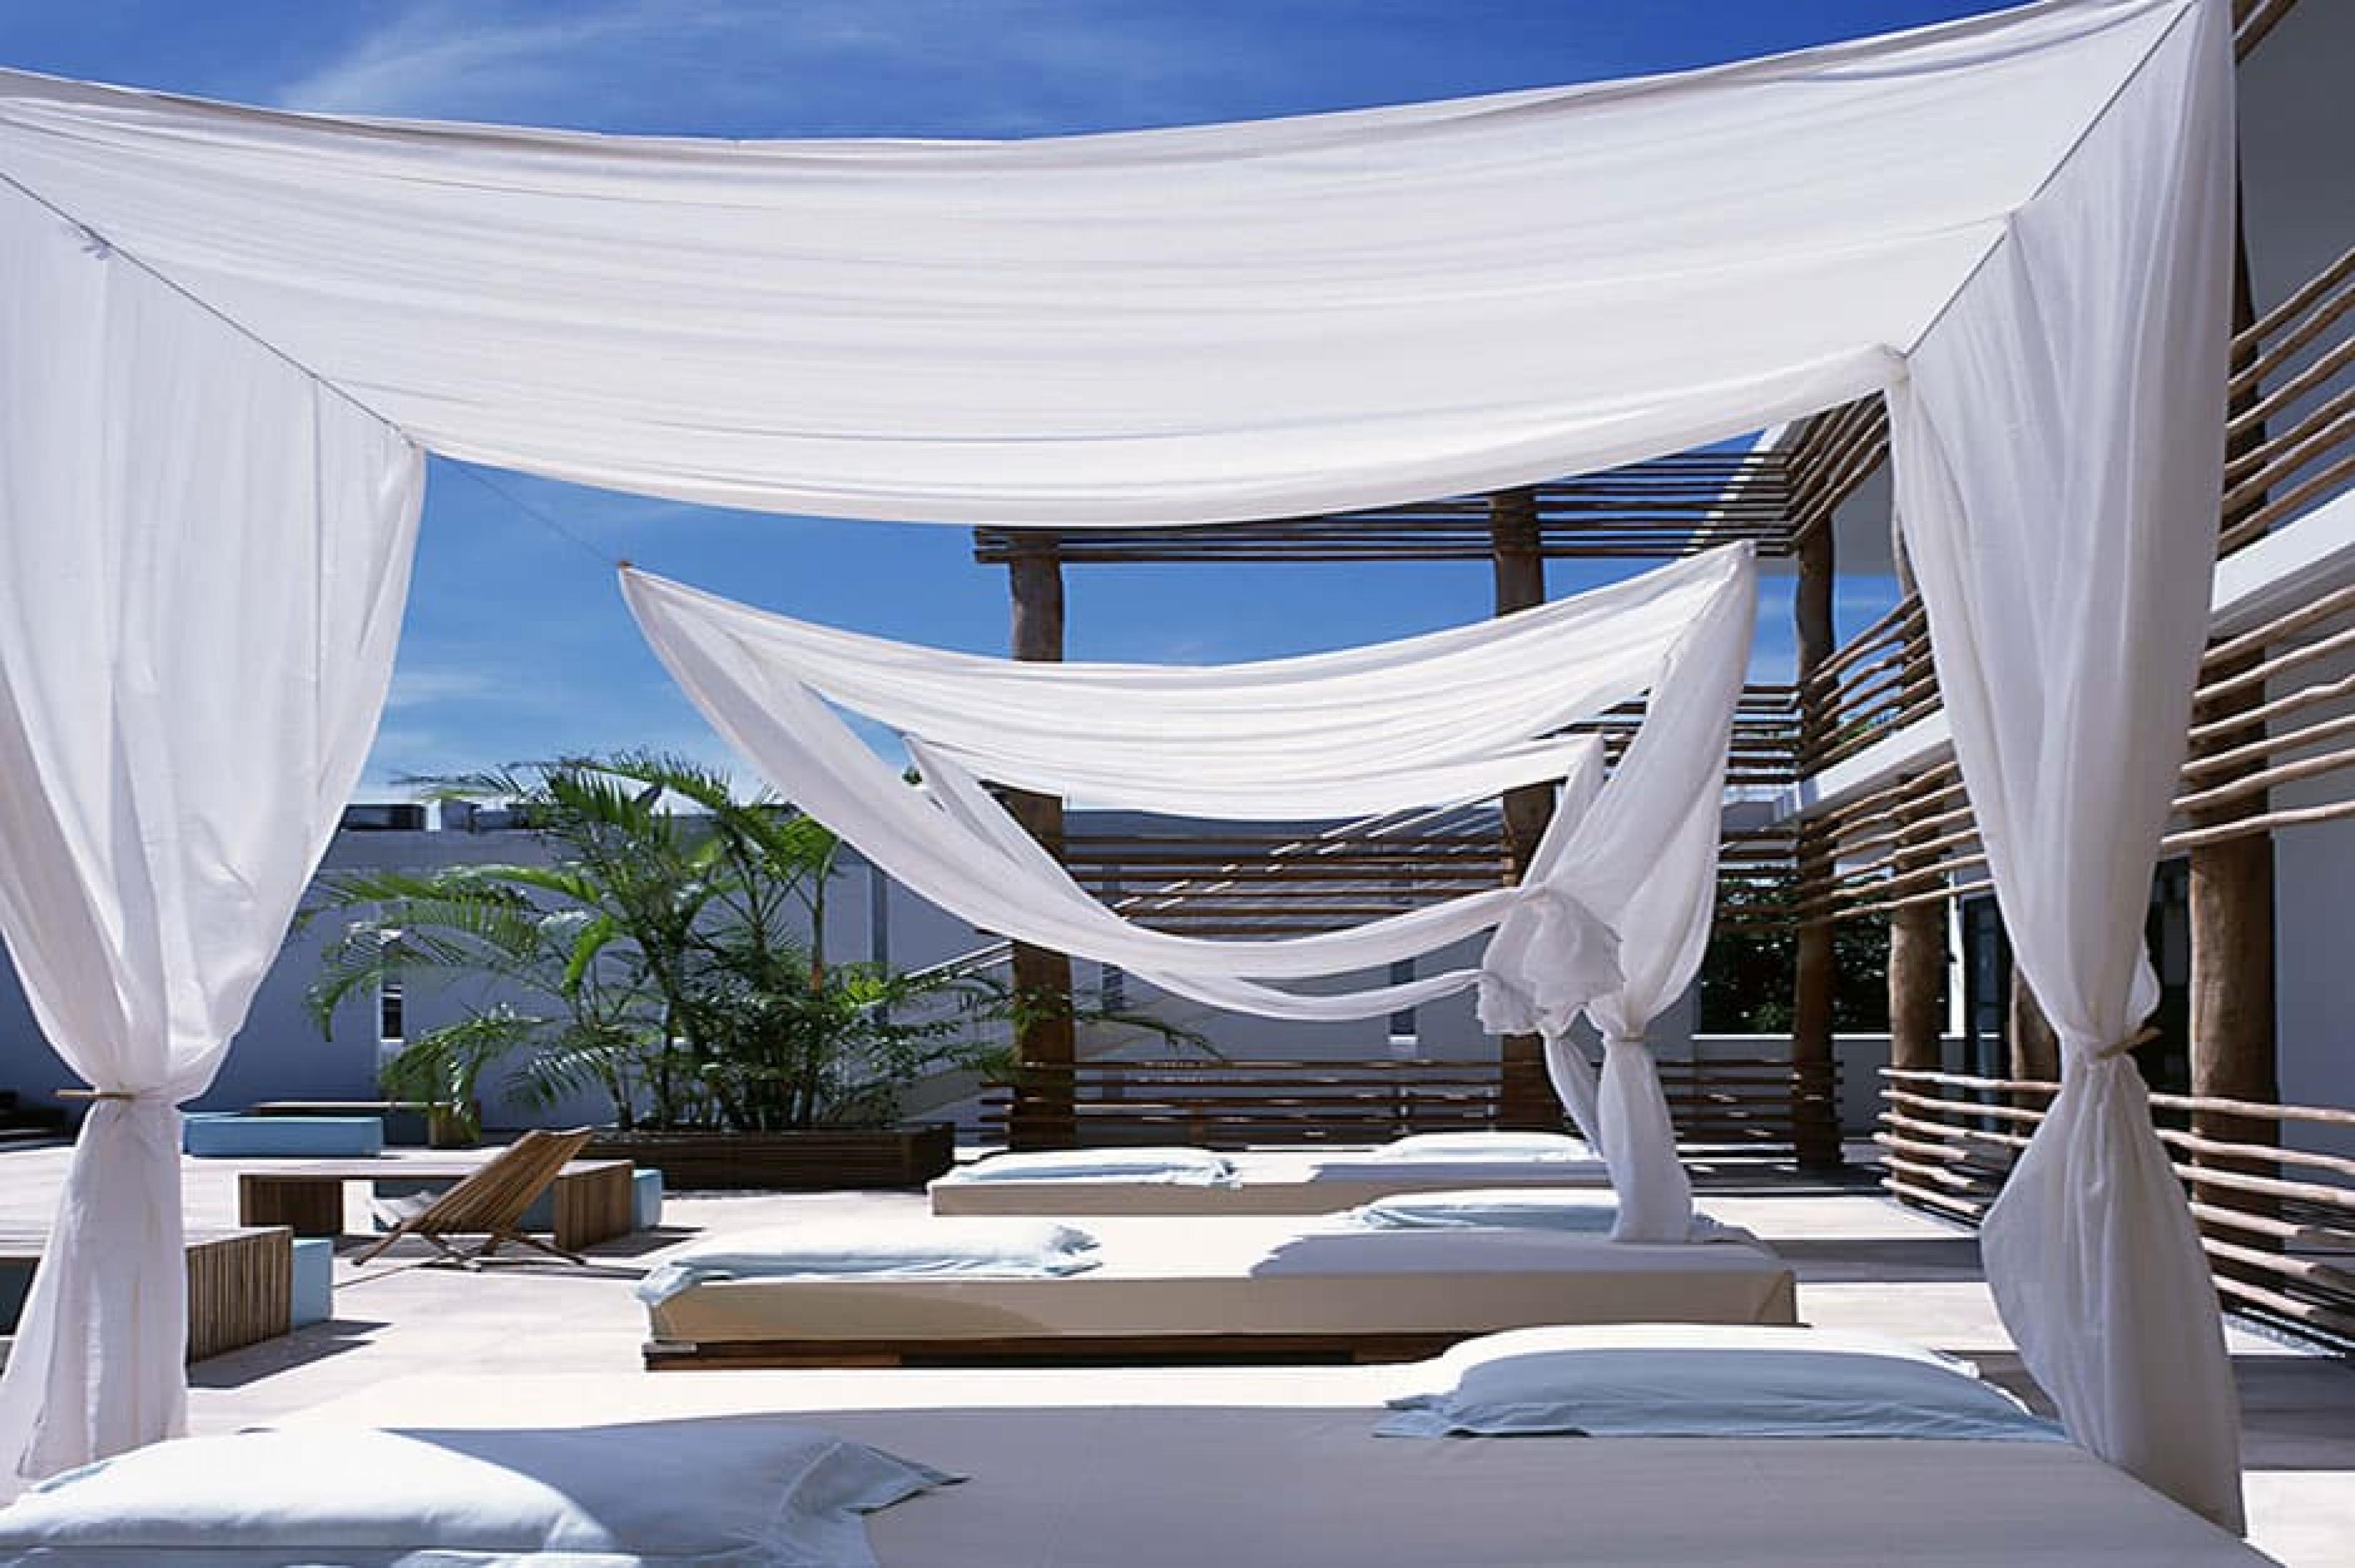 Daybed at Deseo, Riviera Maya, Mexico - Photo by Jan Luc Lalou